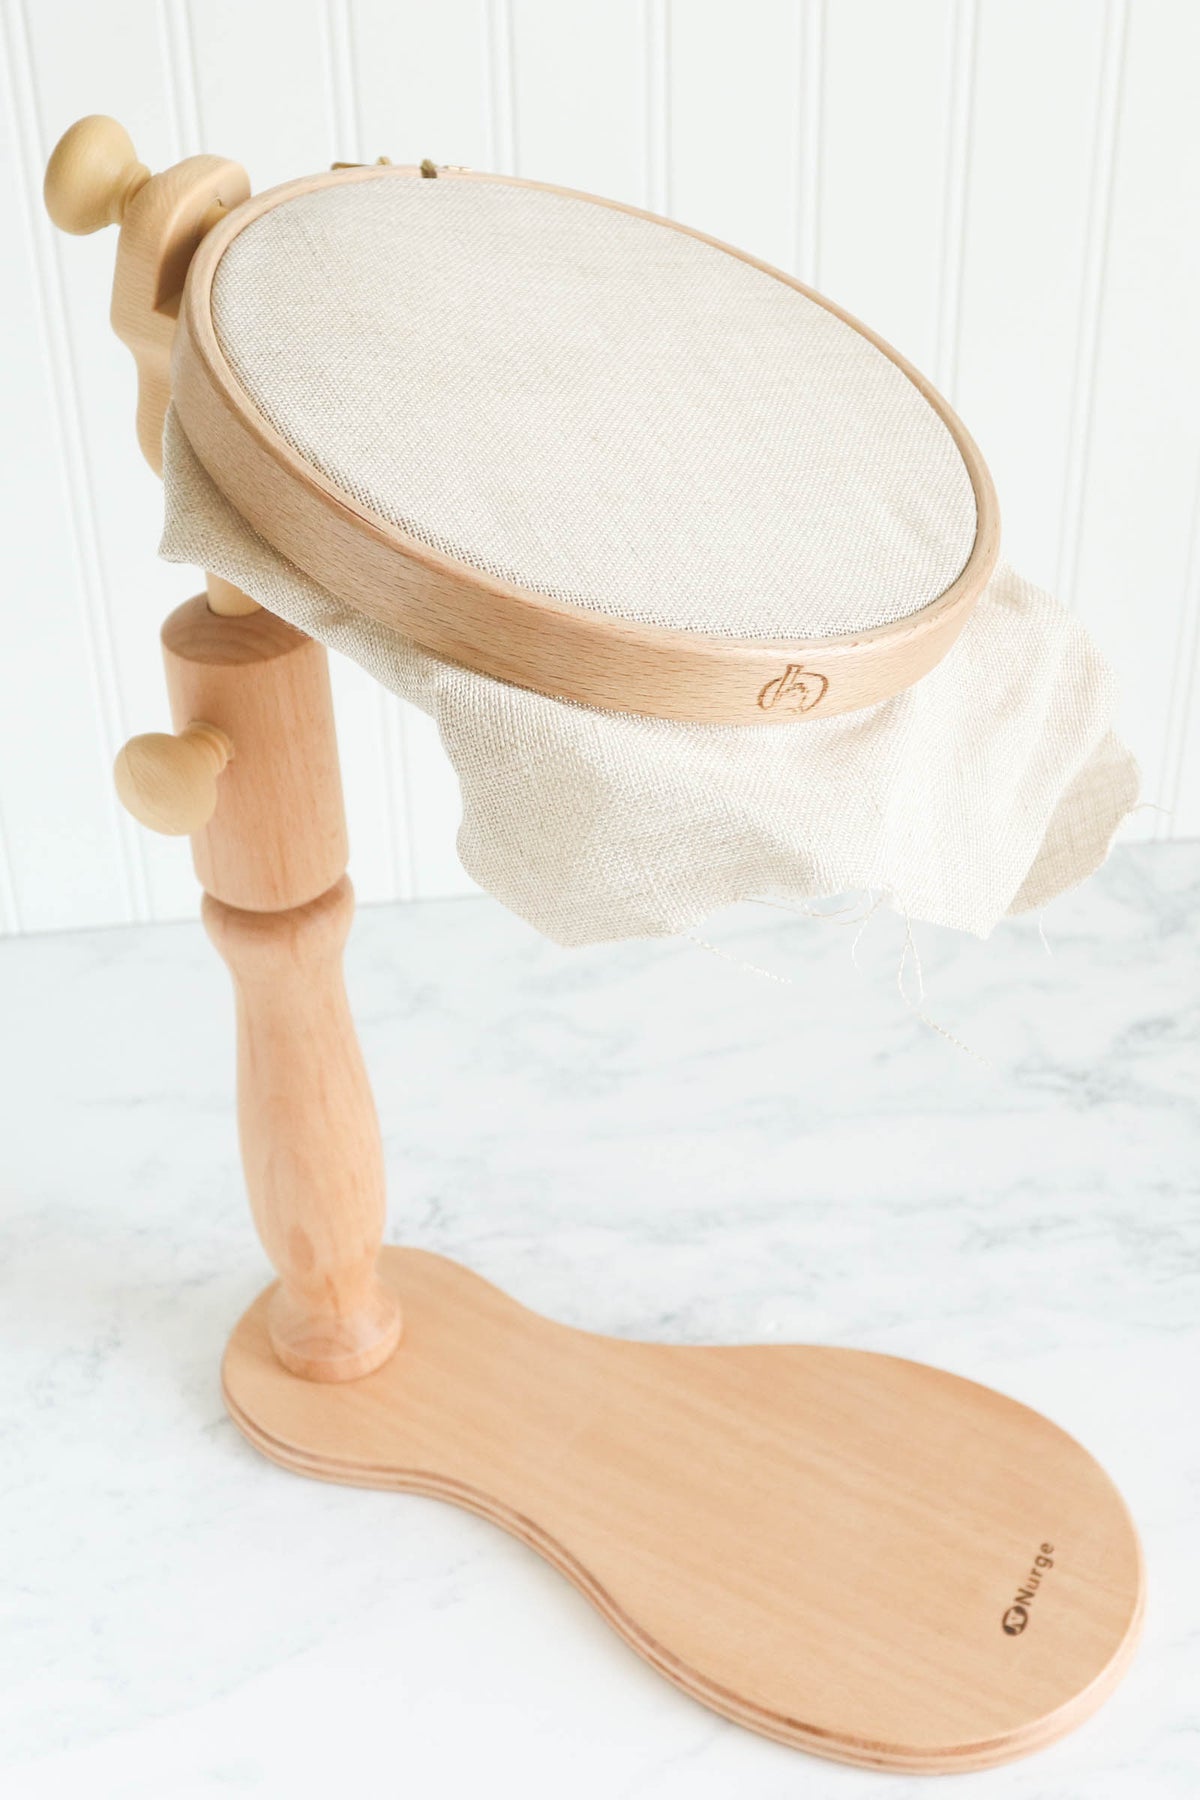 Adjustable Embroidery Hoop Seat Stand